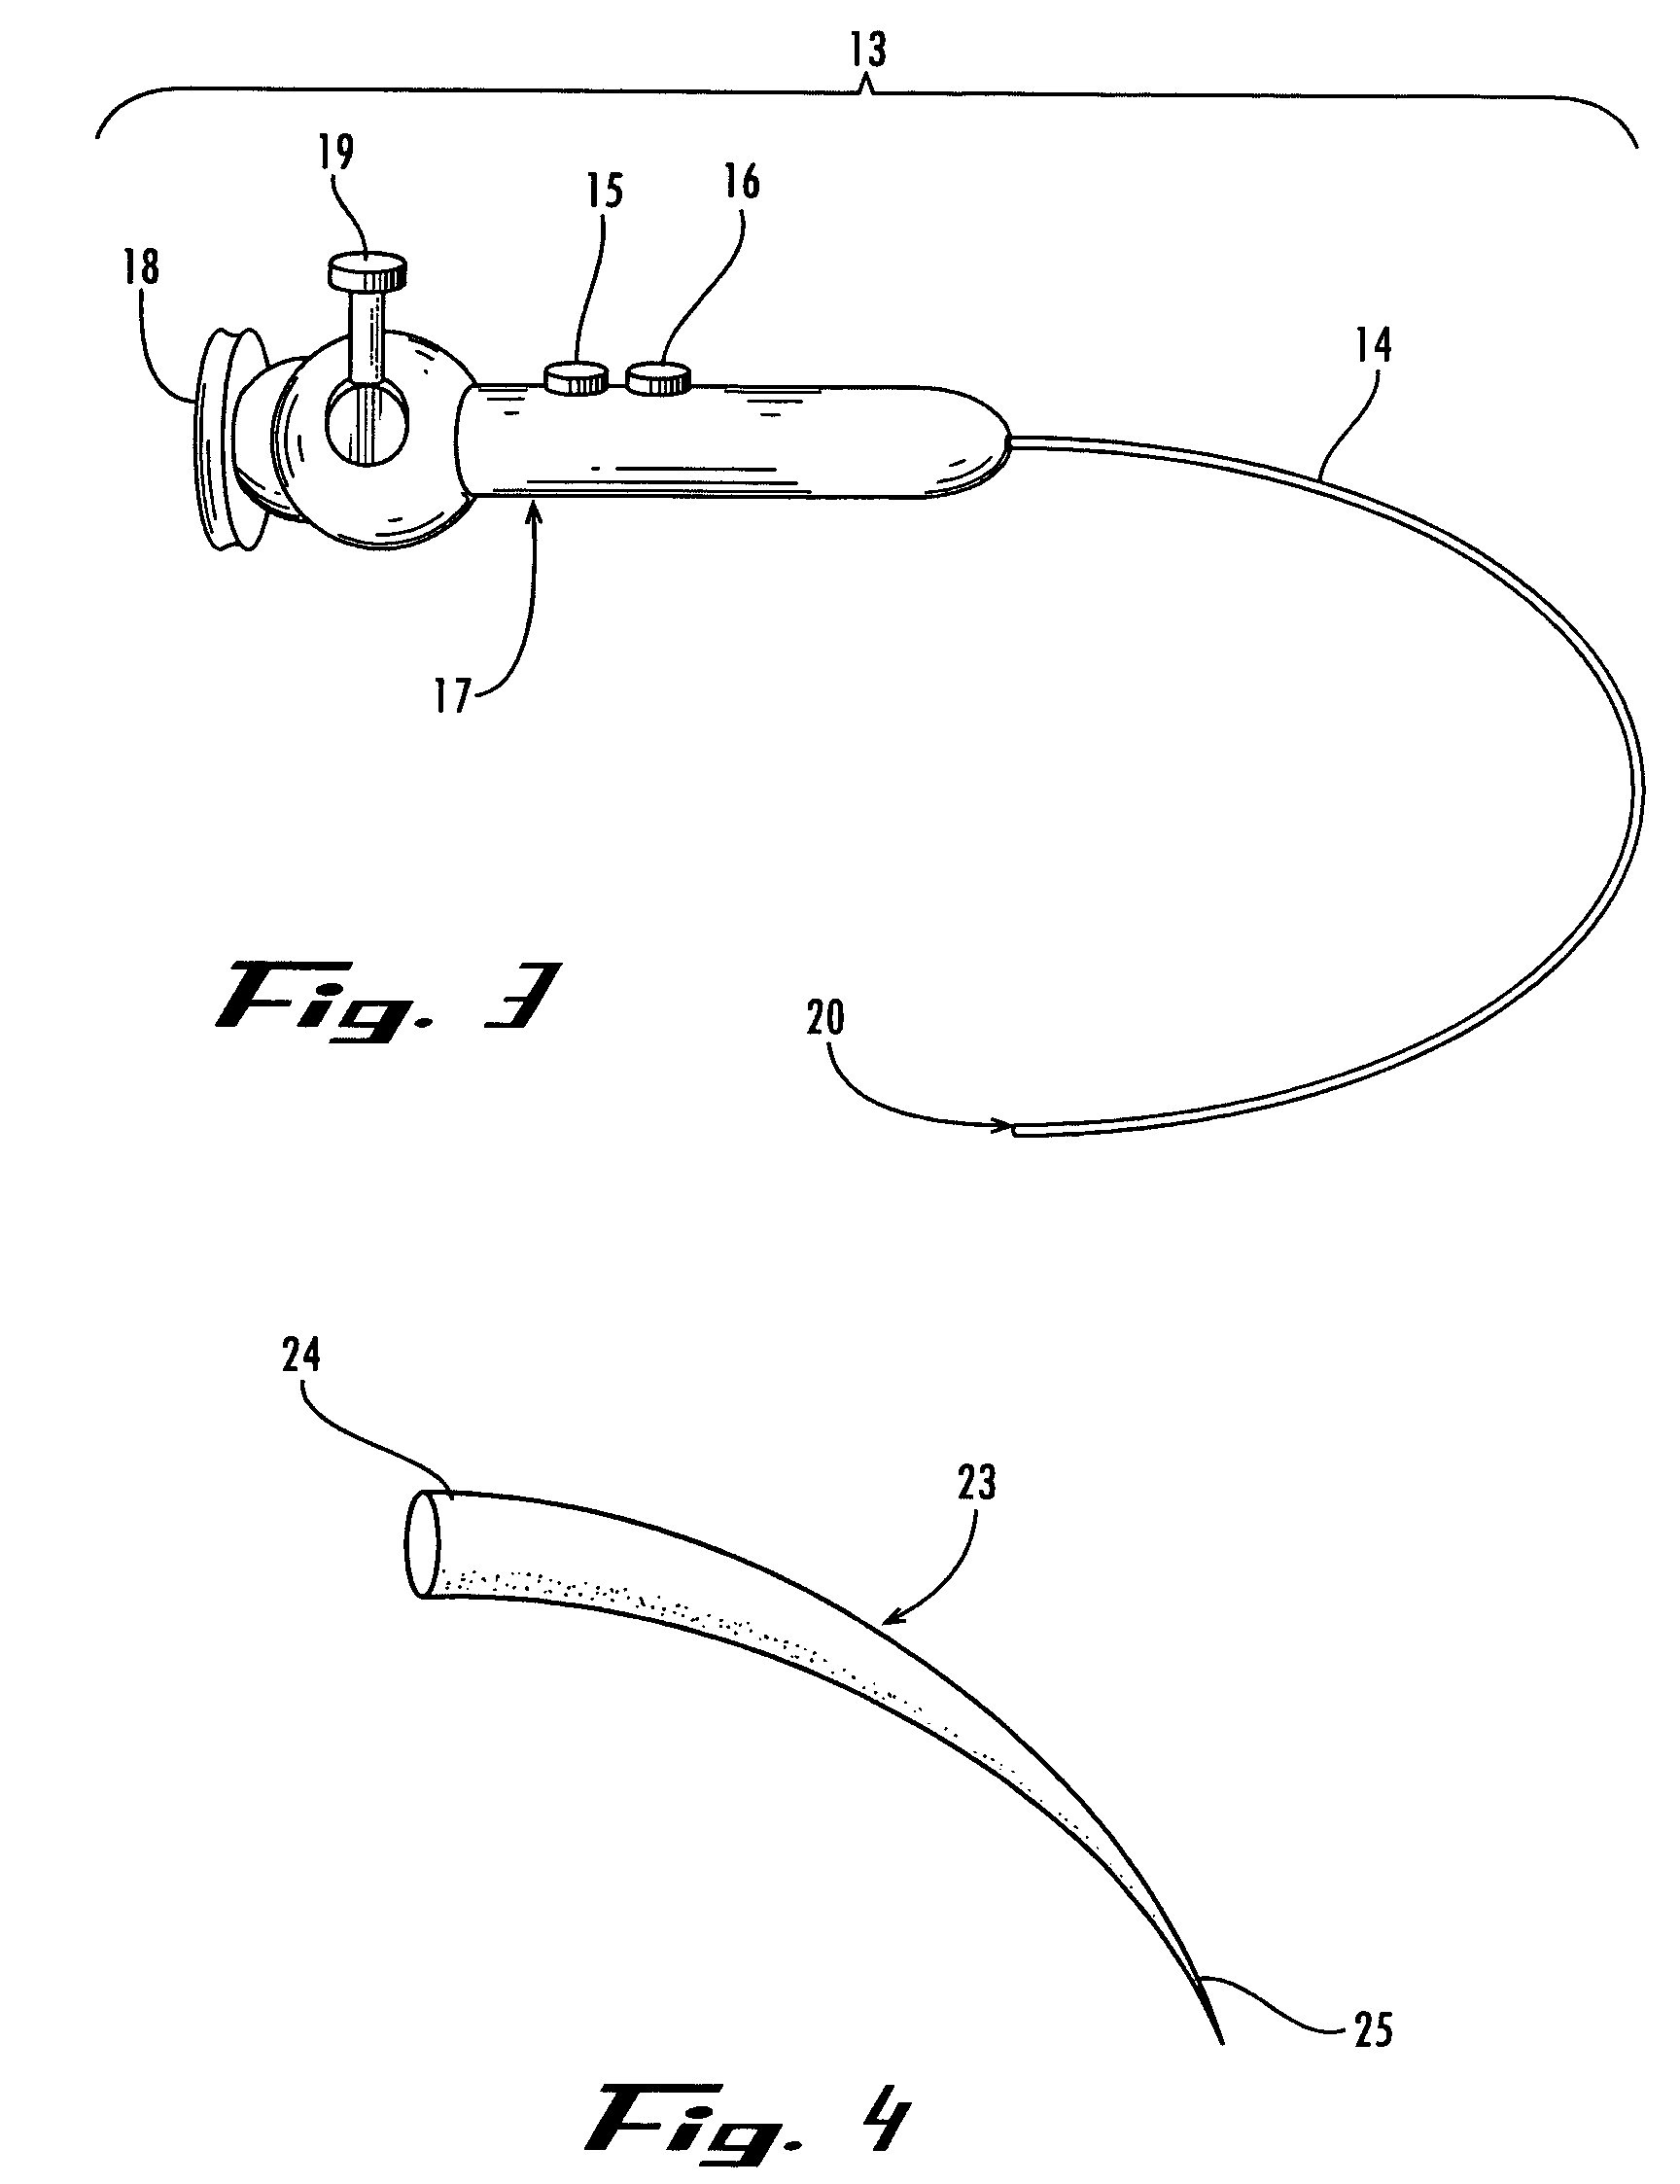 Instrument and method for endoscopic visualization and treatment of anorectal fistula